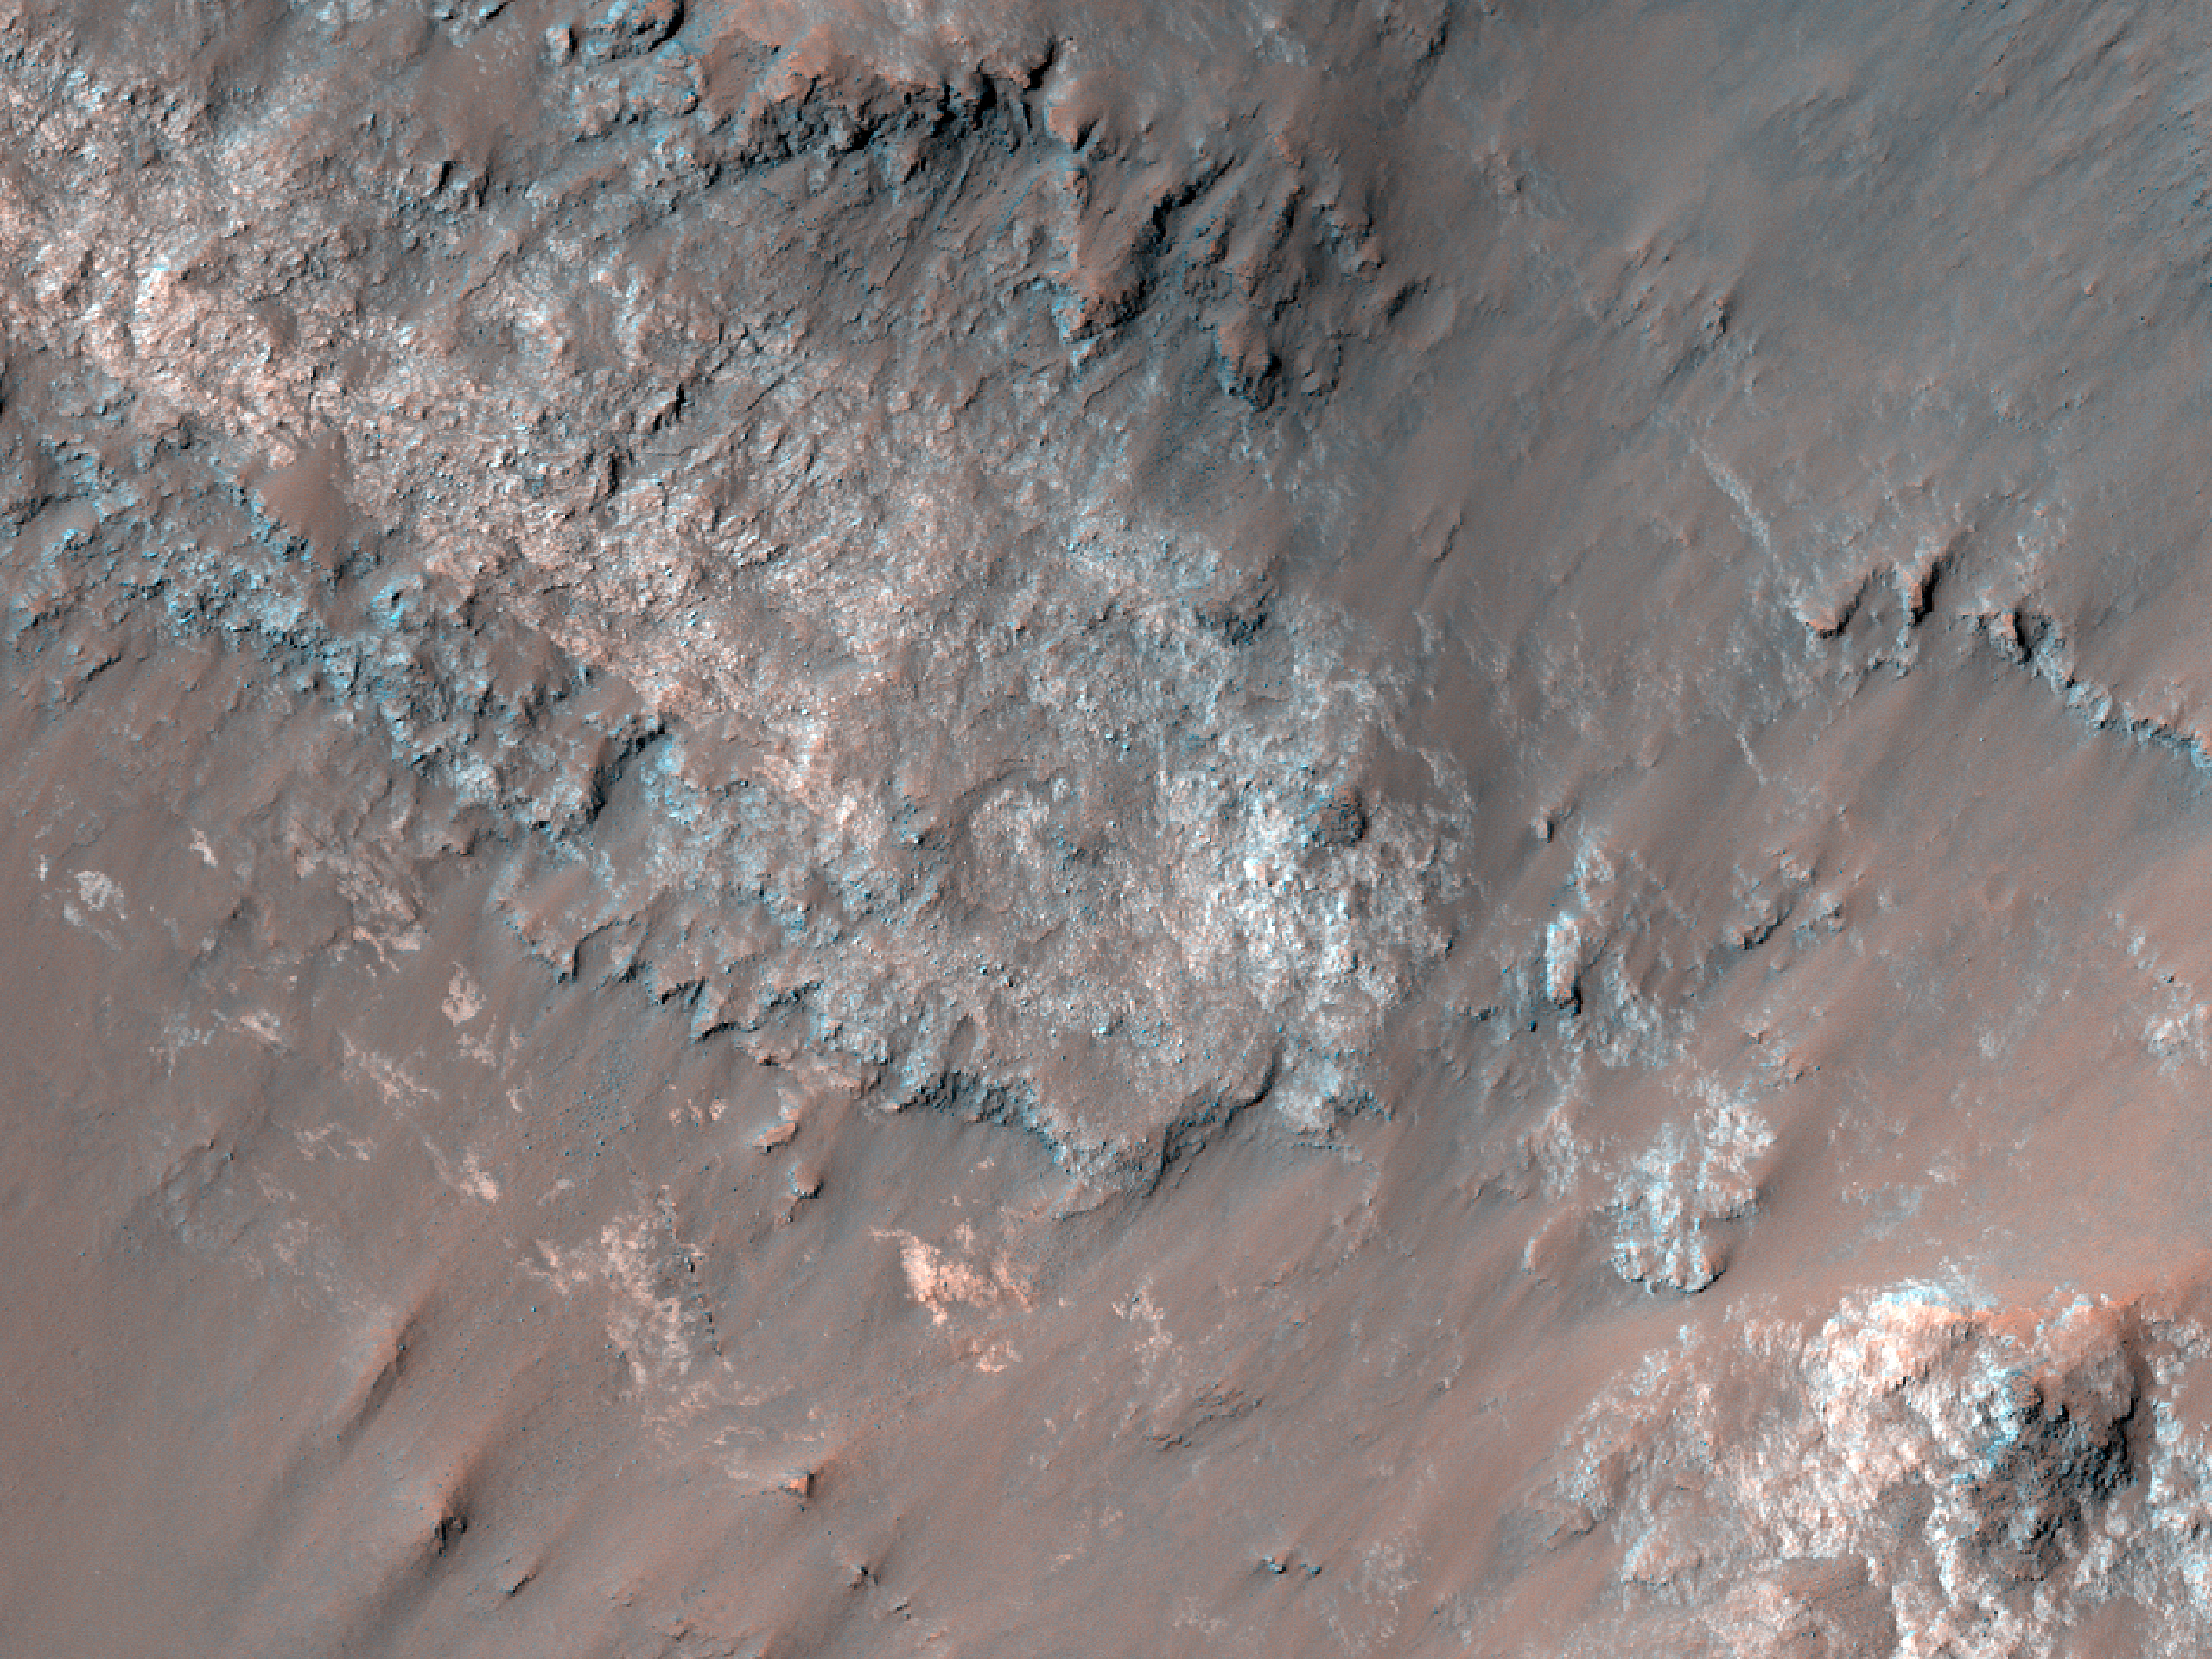 Layers in a Crater Wall